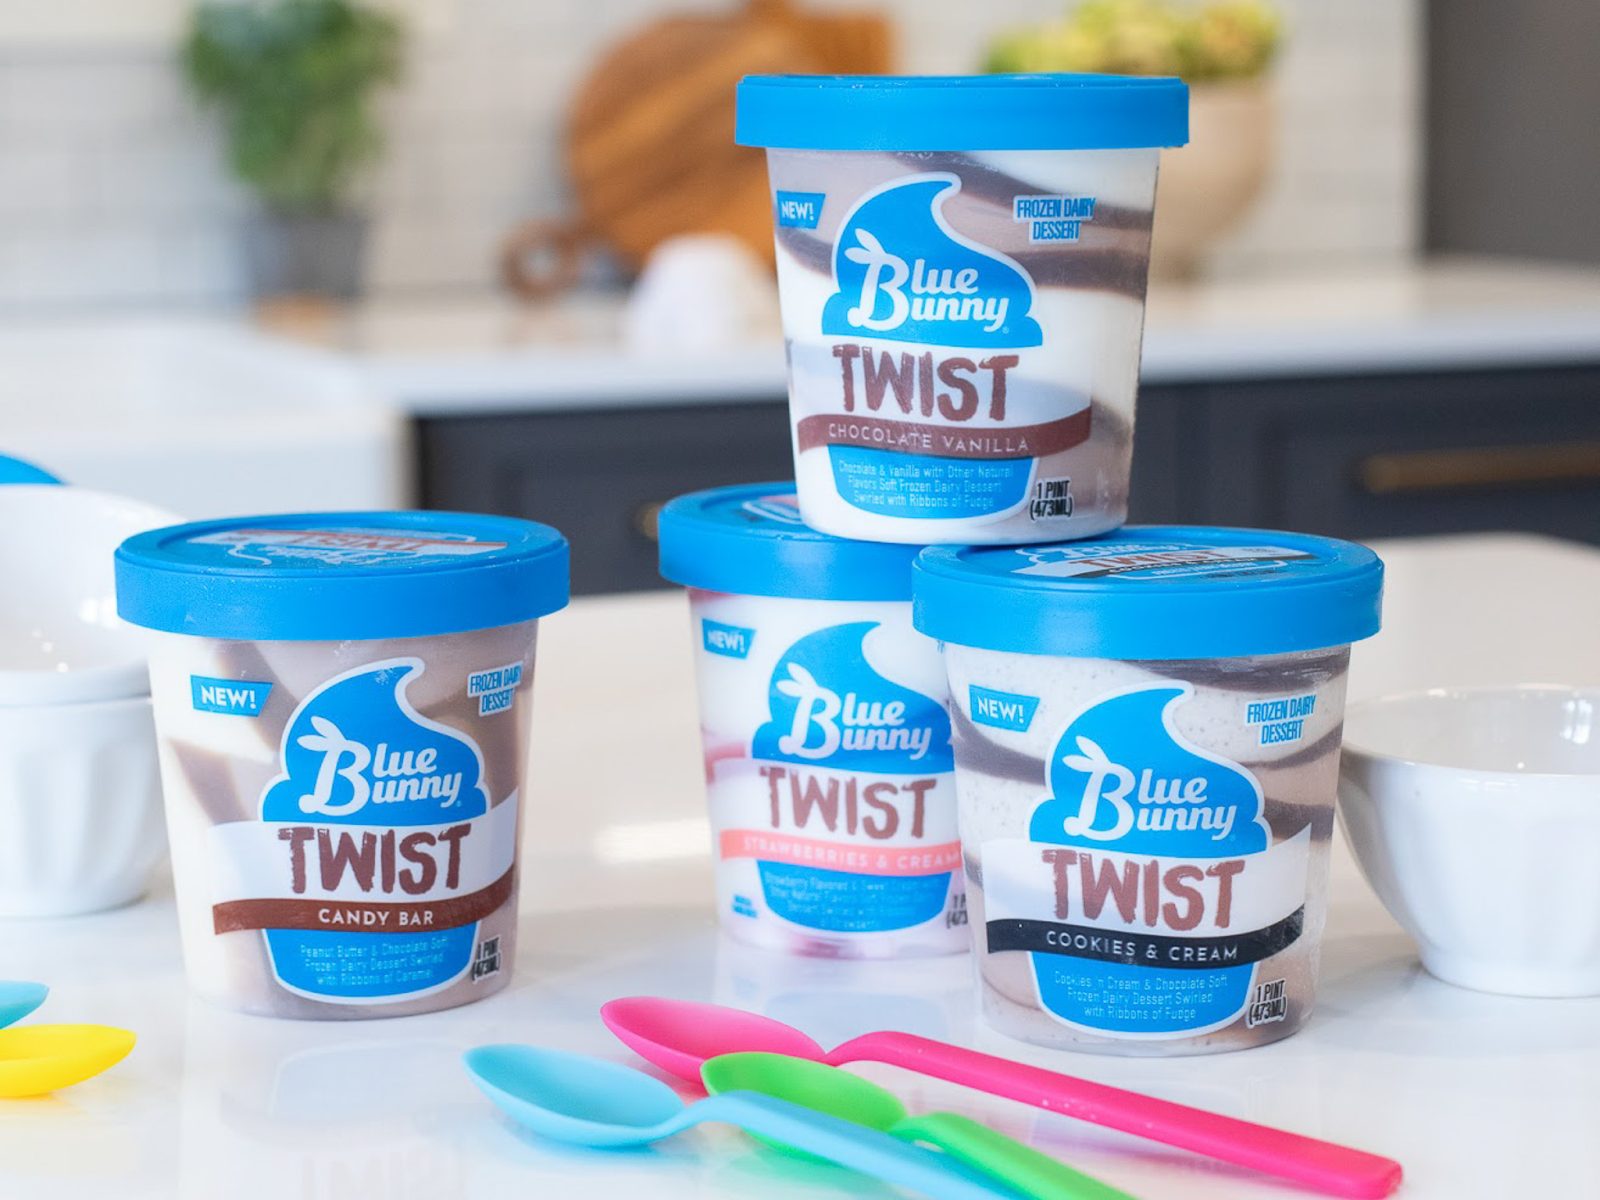 Blue Bunny Twist Pints As Low As $2.49 At Kroger